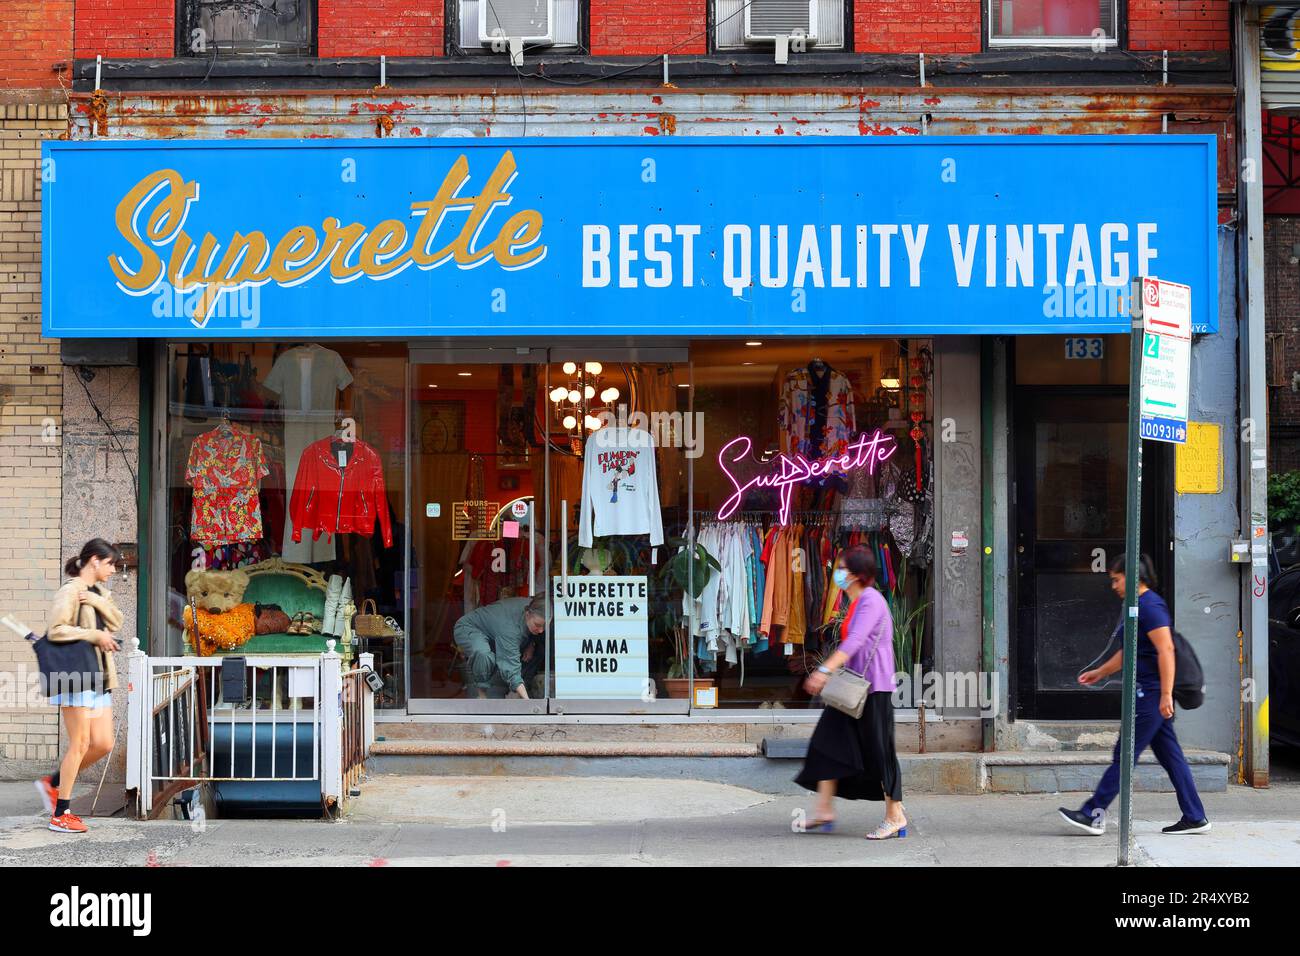 Superette Best Quality Vintage, 133 E Broadway, New York, NYC storefront photo of a thrift store in Manhattan's Chinatown/Lower East Side. Stock Photo